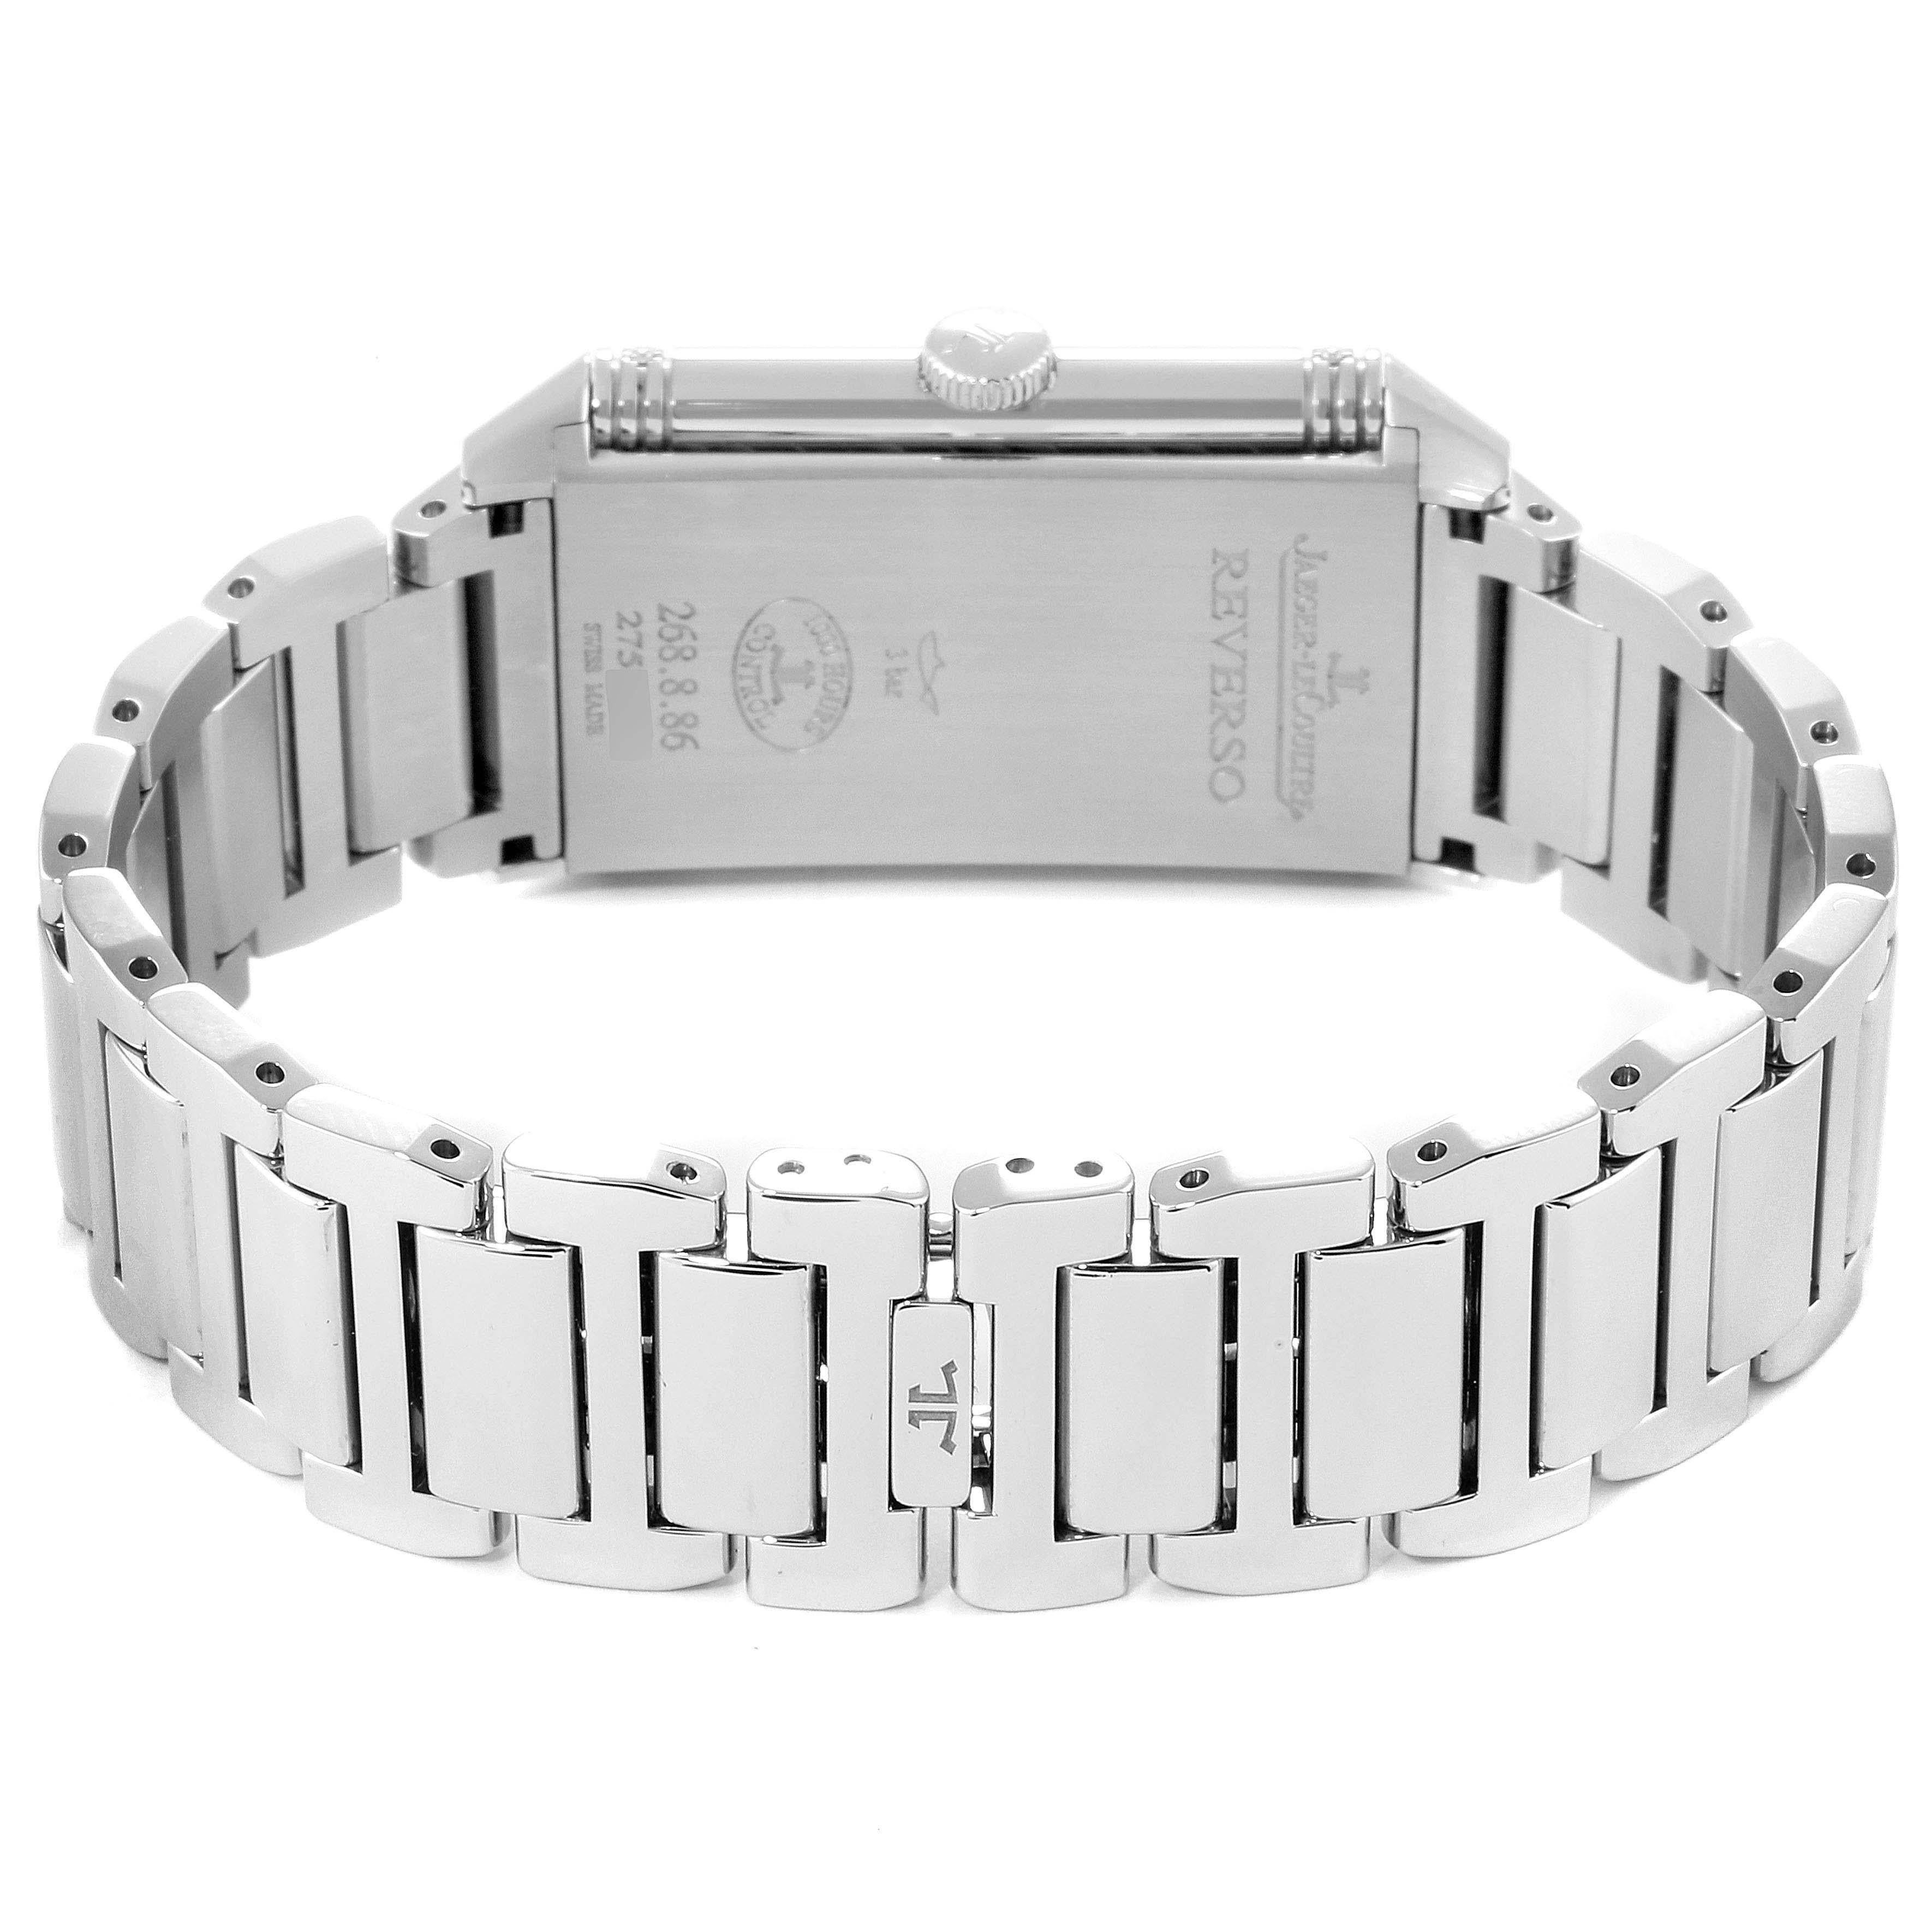 Jaeger LeCoultre Reverso Ultra Thin Diamond Ladies Watch 268.8.86 Q3208121 For Sale 4